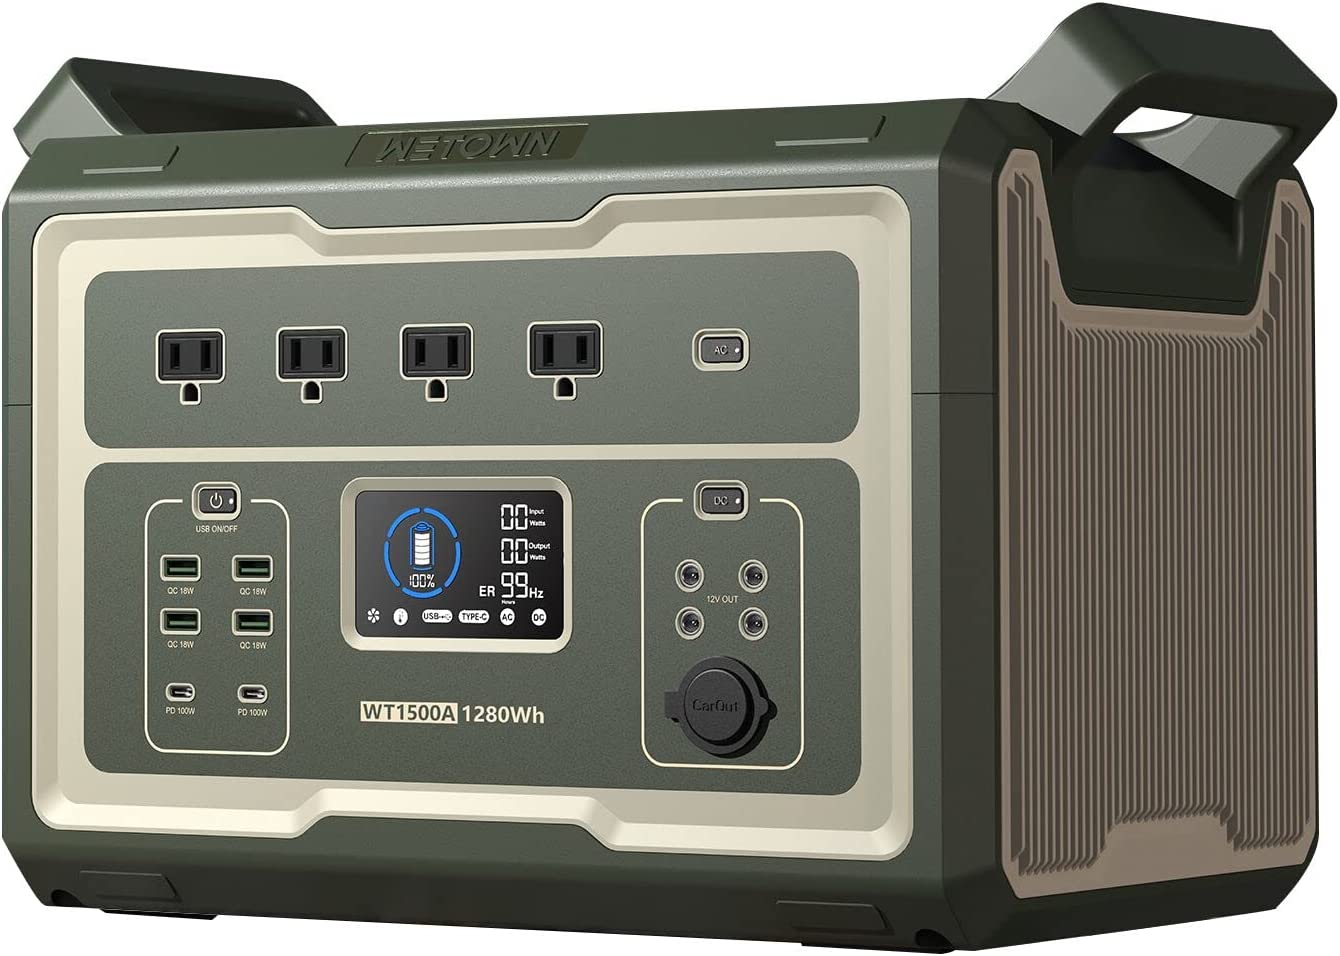 WETOWN Power Station 1500W Solar Generator 1280Wh UPS Battery LiFePO4 Power Station Portable Solar Powered Generators for Home Use Camping RV, 0-100% Fast Recharge in 85 Minutes, 4*AC & PD100W Outlets(1500W)